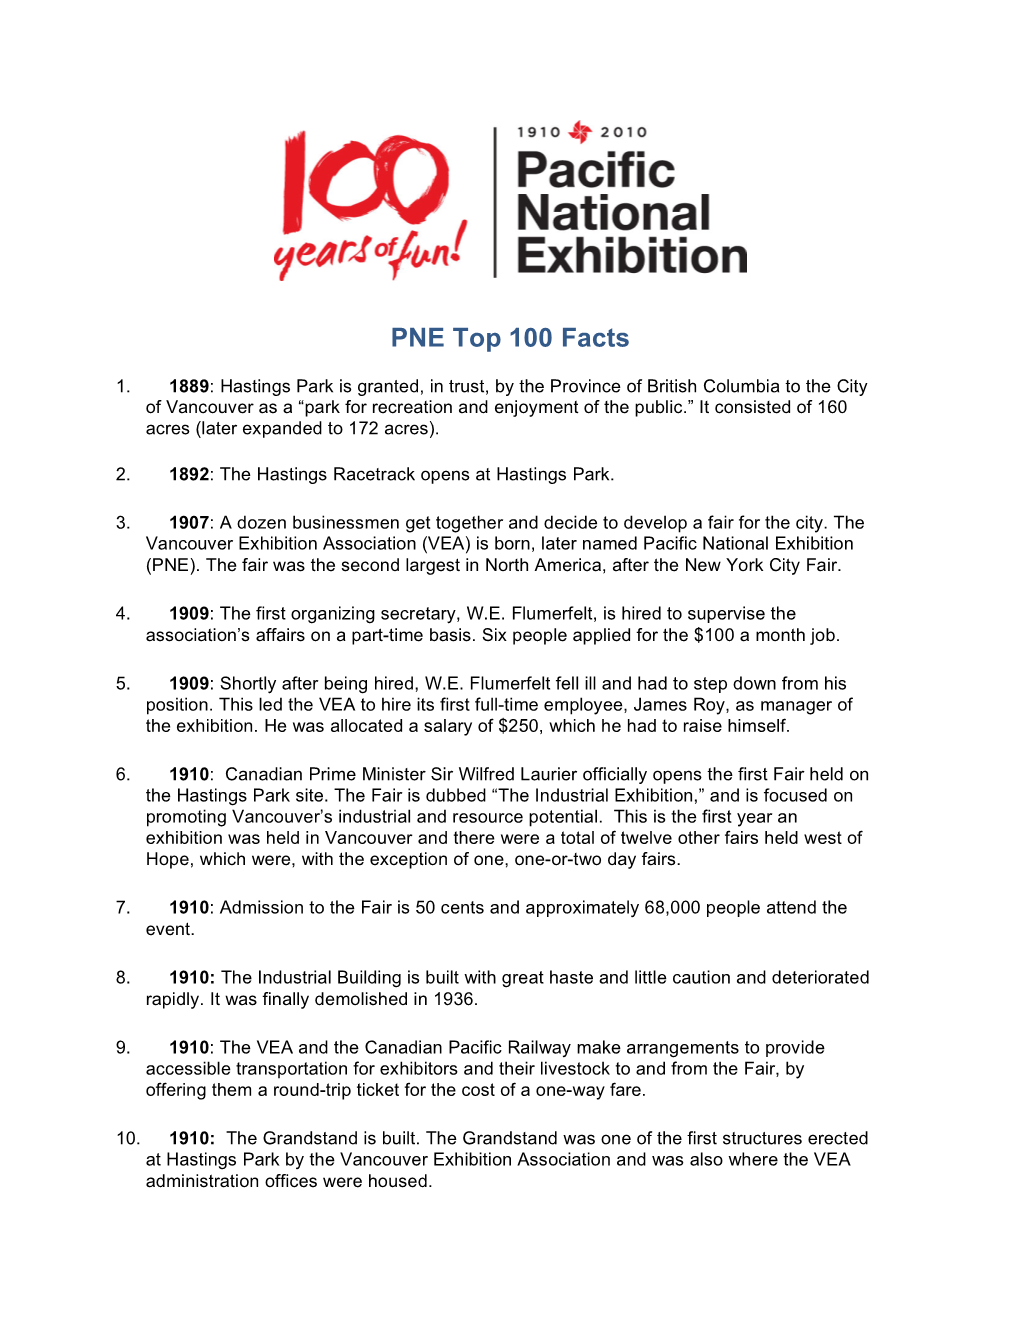 PNE Top 100 Facts-1